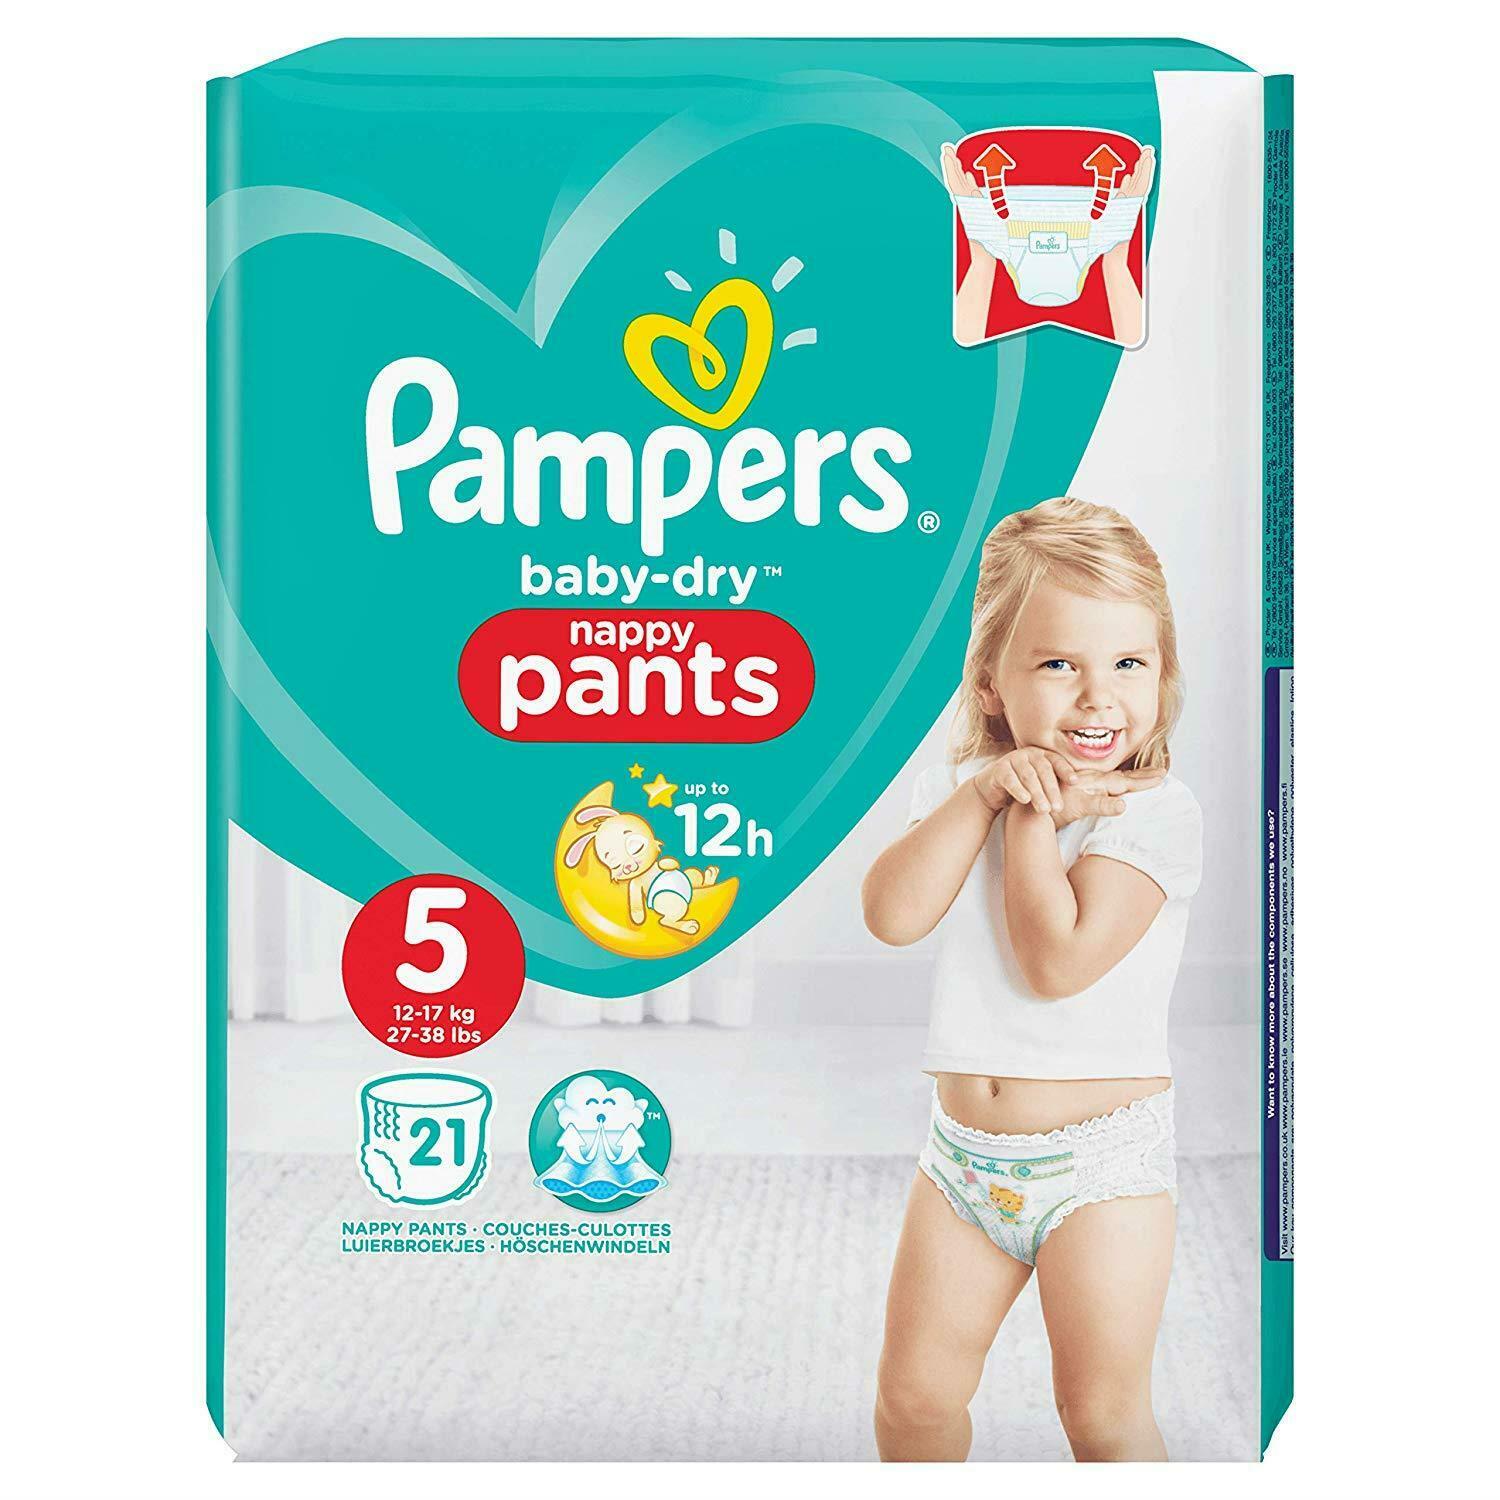 Pampers Baby-Dry Size 5 132 Nappy Pants Easy-On for Up to 12 Hours of 12-17kg 